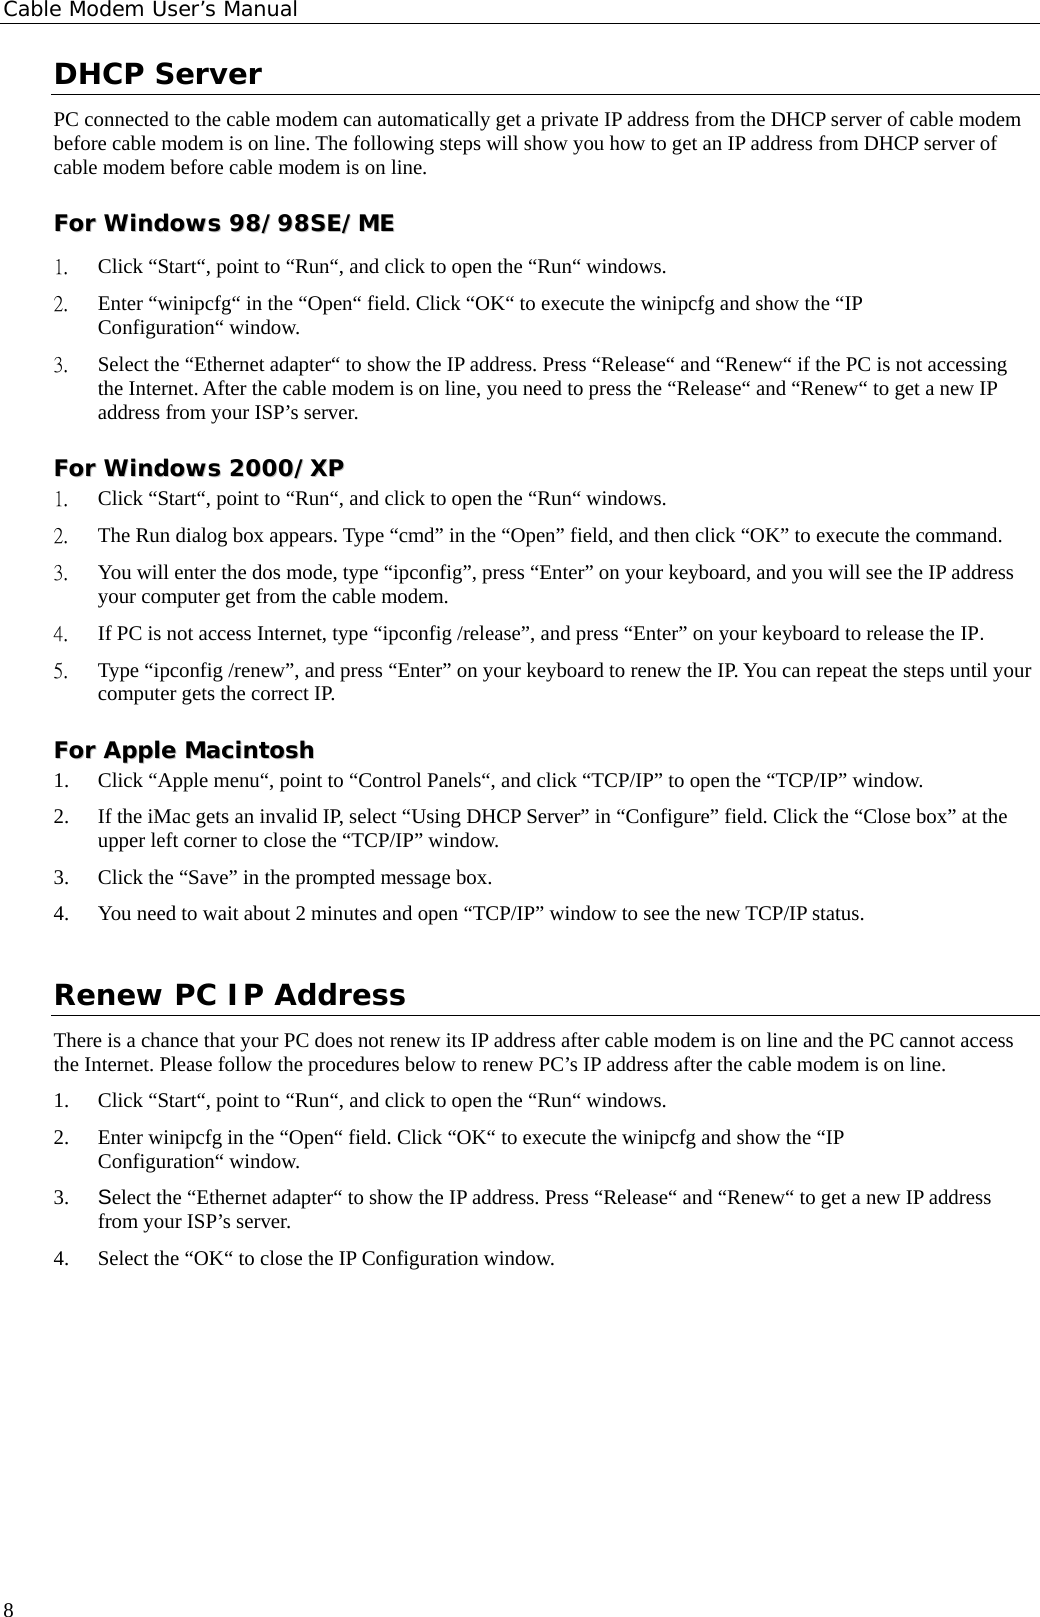 Cable Modem User’s Manual DHCP Server PC connected to the cable modem can automatically get a private IP address from the DHCP server of cable modem before cable modem is on line. The following steps will show you how to get an IP address from DHCP server of cable modem before cable modem is on line. FFoorr  WWiinnddoowwss  9988//9988SSEE//MMEE  1. Click “Start“, point to “Run“, and click to open the “Run“ windows. 2. Enter “winipcfg“ in the “Open“ field. Click “OK“ to execute the winipcfg and show the “IP Configuration“ window. 3. Select the “Ethernet adapter“ to show the IP address. Press “Release“ and “Renew“ if the PC is not accessing the Internet. After the cable modem is on line, you need to press the “Release“ and “Renew“ to get a new IP address from your ISP’s server. FFoorr  WWiinnddoowwss  22000000//XXPP  1. Click “Start“, point to “Run“, and click to open the “Run“ windows. 2. The Run dialog box appears. Type “cmd” in the “Open” field, and then click “OK” to execute the command. 3. You will enter the dos mode, type “ipconfig”, press “Enter” on your keyboard, and you will see the IP address your computer get from the cable modem. 4. If PC is not access Internet, type “ipconfig /release”, and press “Enter” on your keyboard to release the IP. 5. Type “ipconfig /renew”, and press “Enter” on your keyboard to renew the IP. You can repeat the steps until your computer gets the correct IP. FFoorr  AAppppllee  MMaacciinnttoosshh  1. Click “Apple menu“, point to “Control Panels“, and click “TCP/IP” to open the “TCP/IP” window. 2. If the iMac gets an invalid IP, select “Using DHCP Server” in “Configure” field. Click the “Close box” at the upper left corner to close the “TCP/IP” window. 3. Click the “Save” in the prompted message box.   4. You need to wait about 2 minutes and open “TCP/IP” window to see the new TCP/IP status. Renew PC IP Address There is a chance that your PC does not renew its IP address after cable modem is on line and the PC cannot access the Internet. Please follow the procedures below to renew PC’s IP address after the cable modem is on line. 1. Click “Start“, point to “Run“, and click to open the “Run“ windows. 2. Enter winipcfg in the “Open“ field. Click “OK“ to execute the winipcfg and show the “IP Configuration“ window. 3. Select the “Ethernet adapter“ to show the IP address. Press “Release“ and “Renew“ to get a new IP address from your ISP’s server. 4. Select the “OK“ to close the IP Configuration window.      8